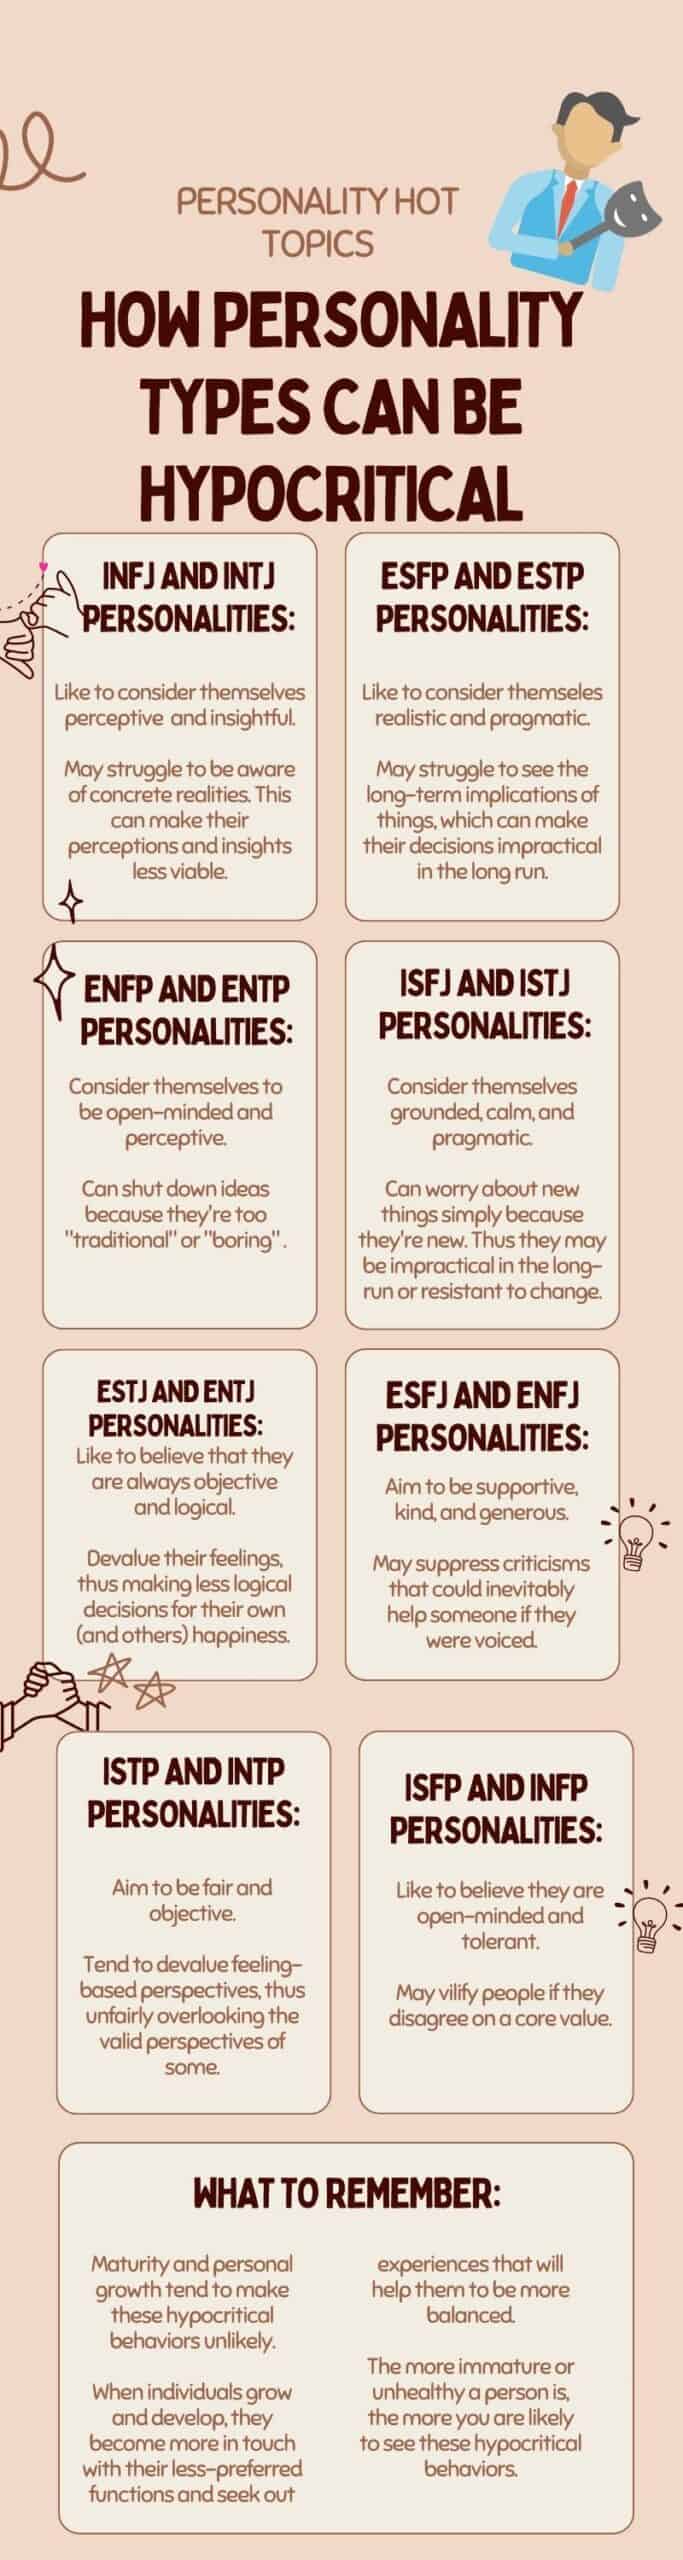 How the 16 personality types can be hypocritical #MBTI